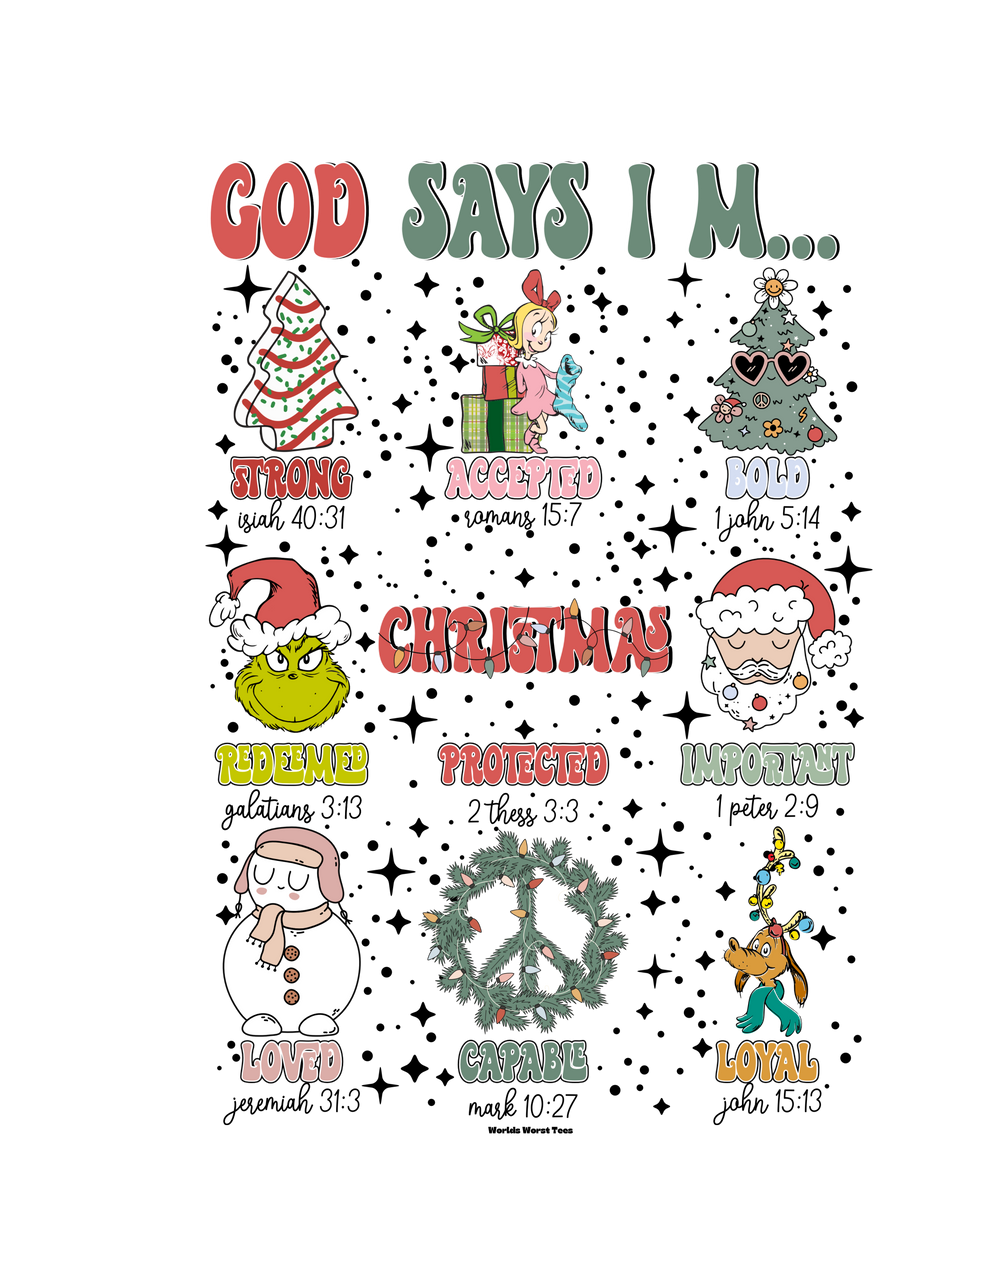 A cozy unisex crewneck sweatshirt titled God Says I'm Crew in medium-heavy fabric with ribbed knit collar. No itchy side seams, ideal for comfort. Features a snowman, Santa Claus, and Christmas tree design.